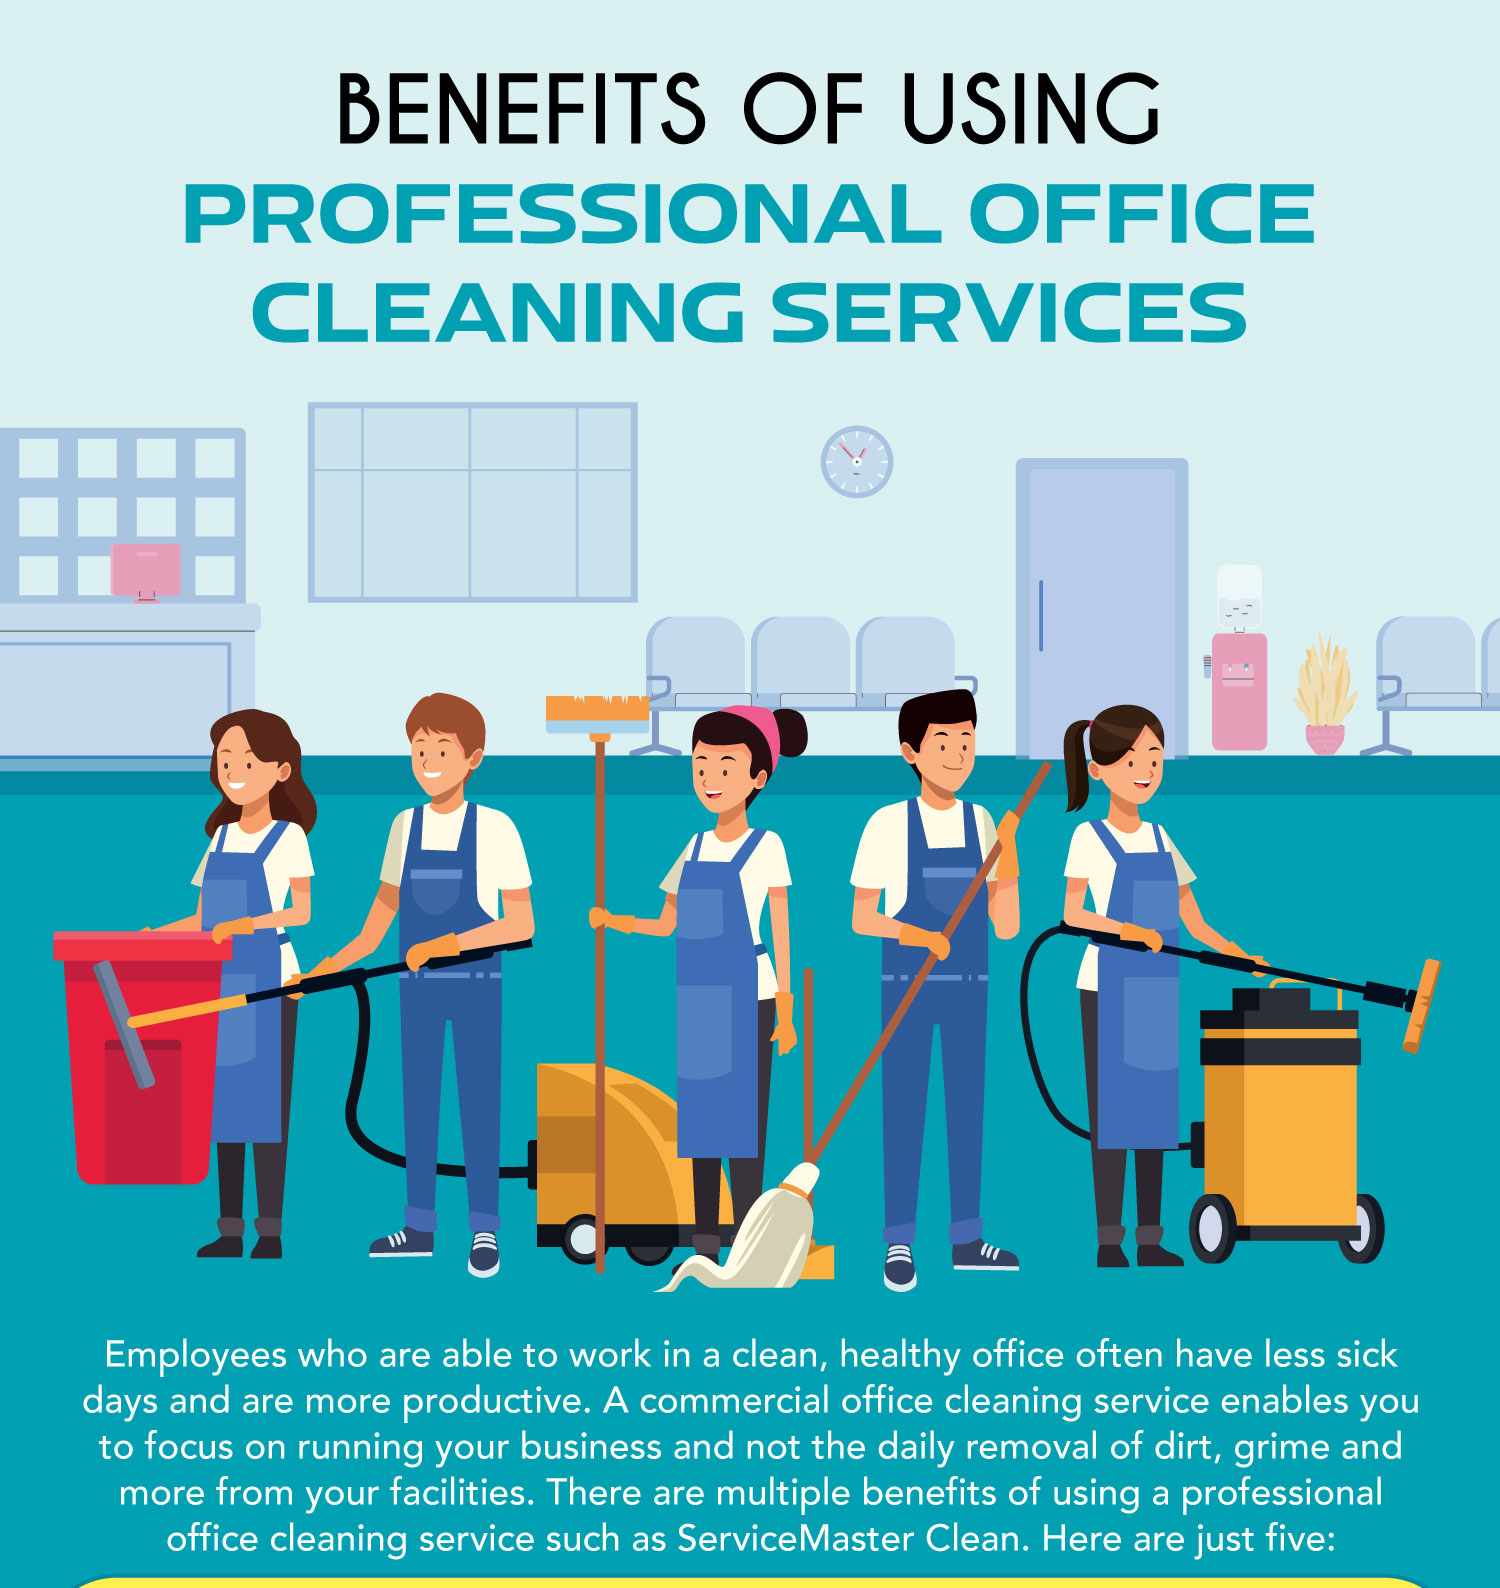 Benefits of using professional cleaning services